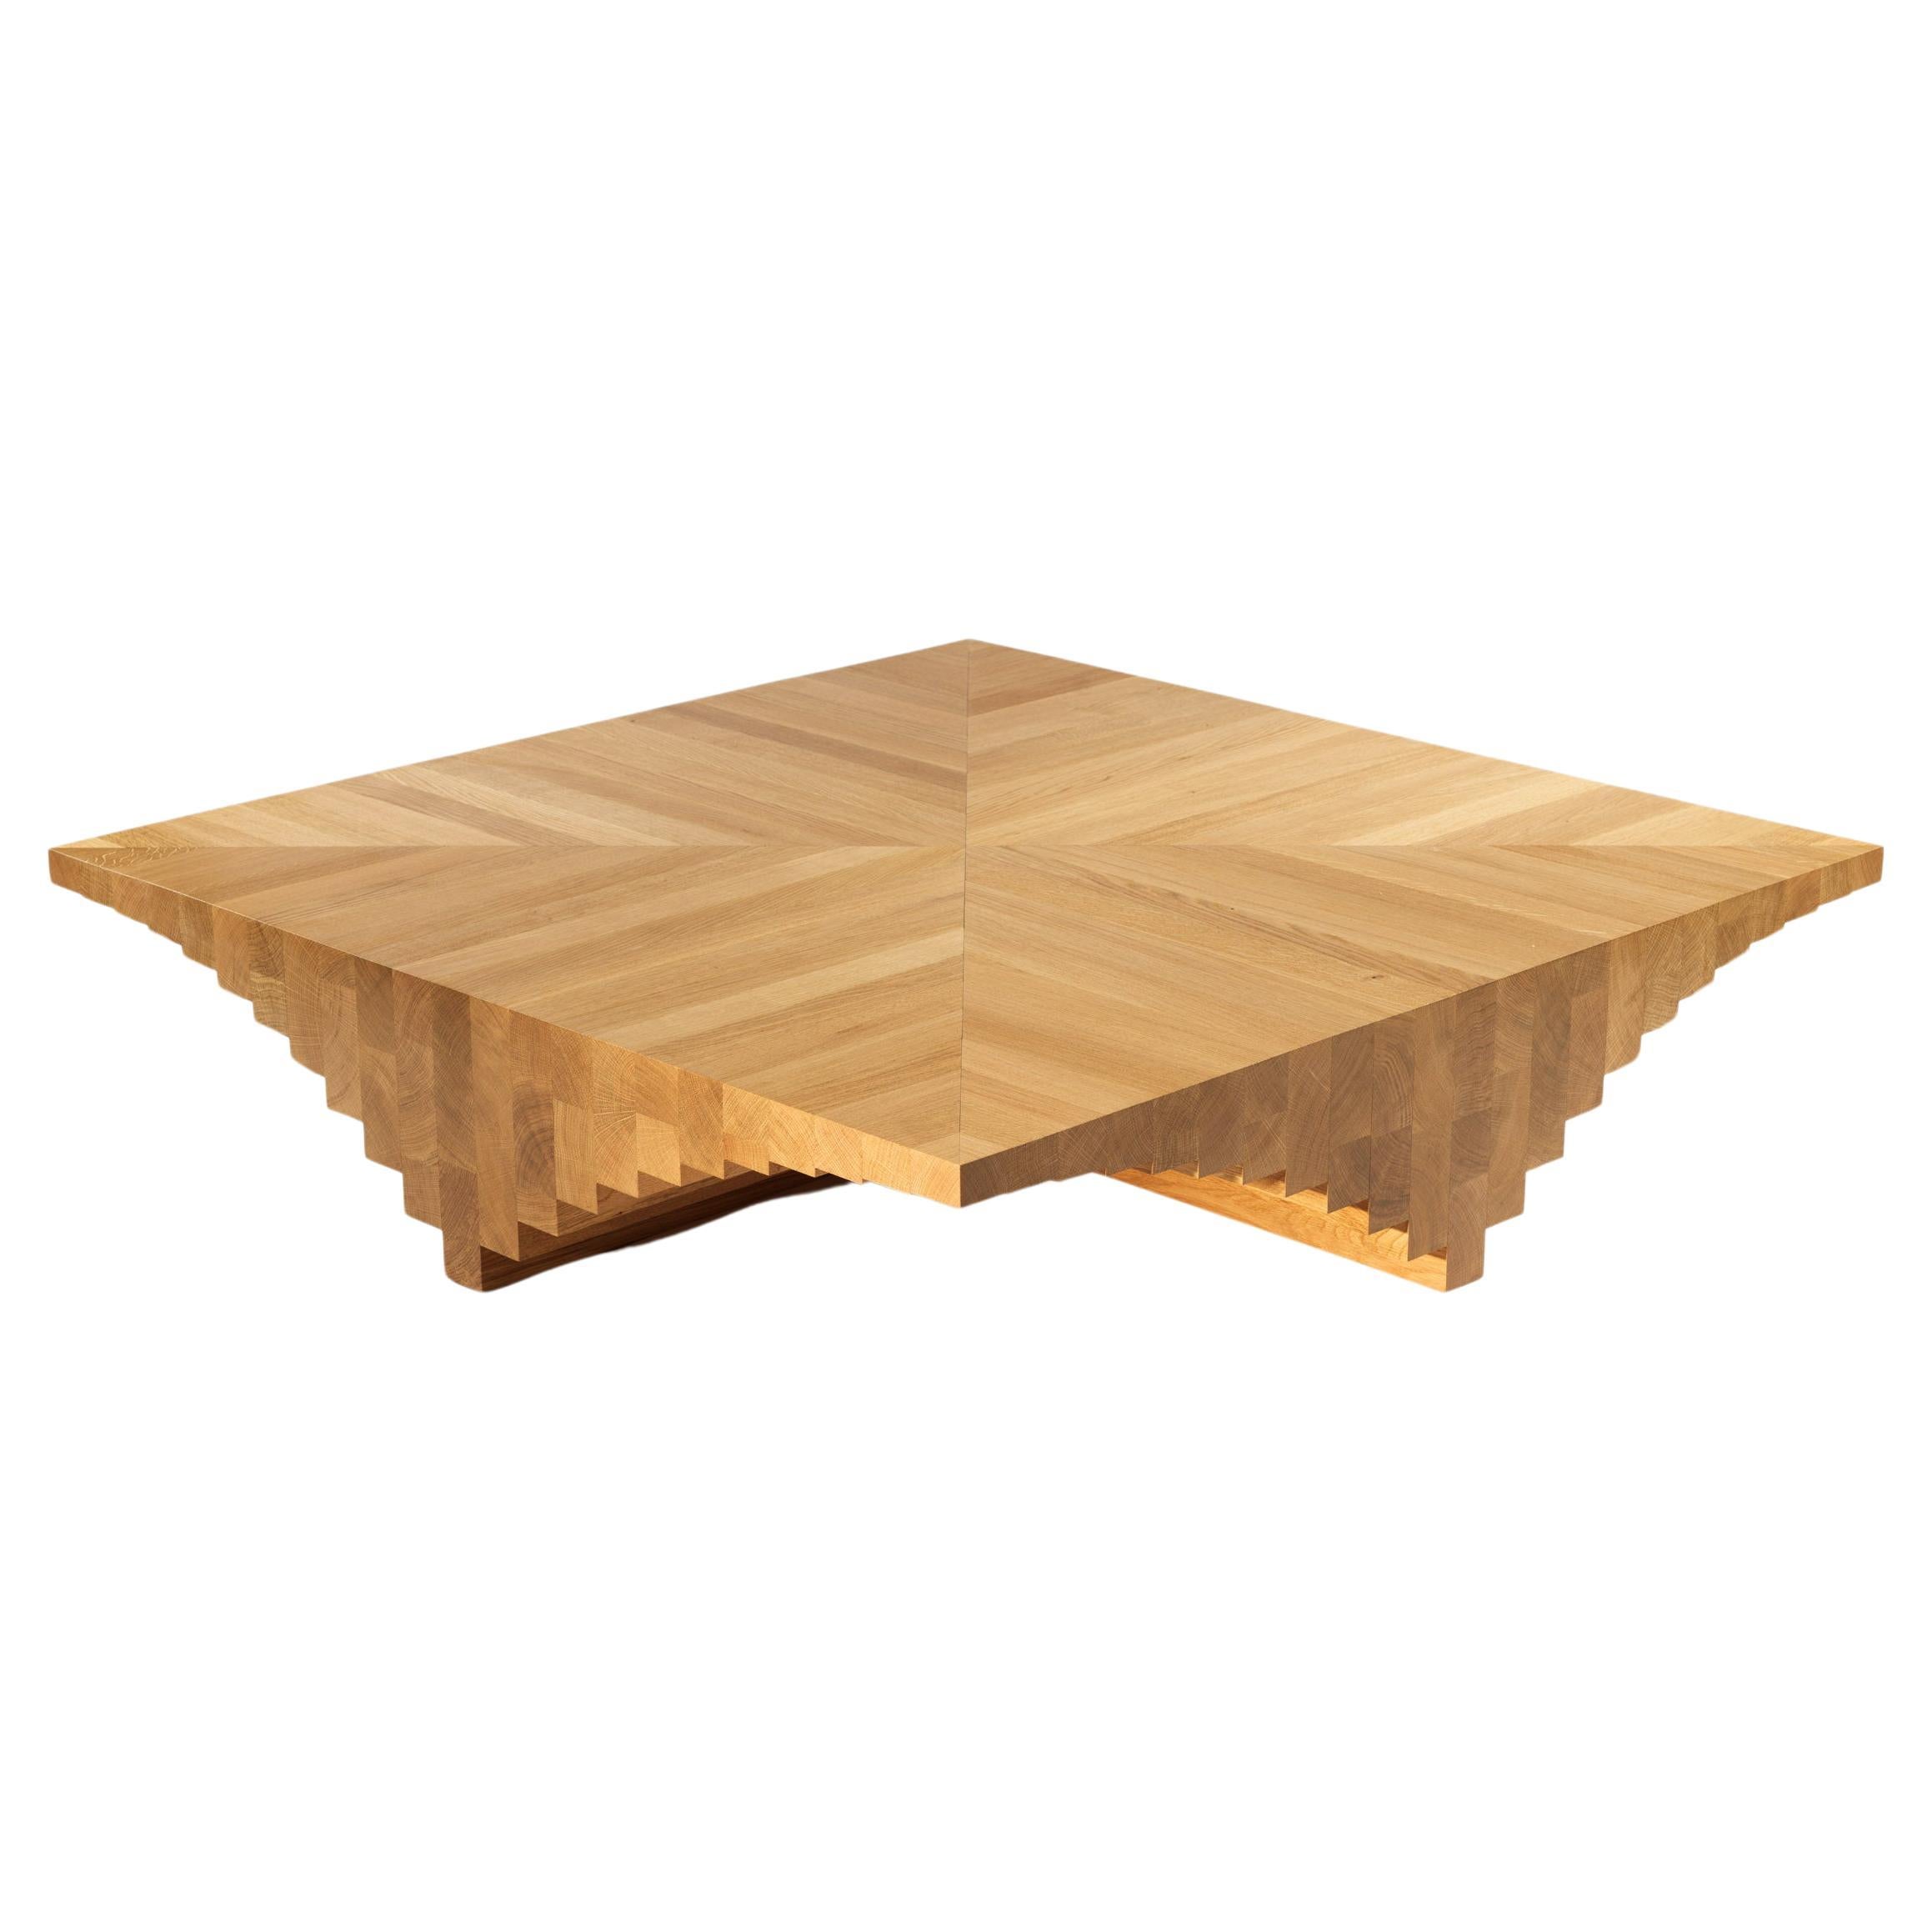 Ater Coffee Table by Tim Vranken